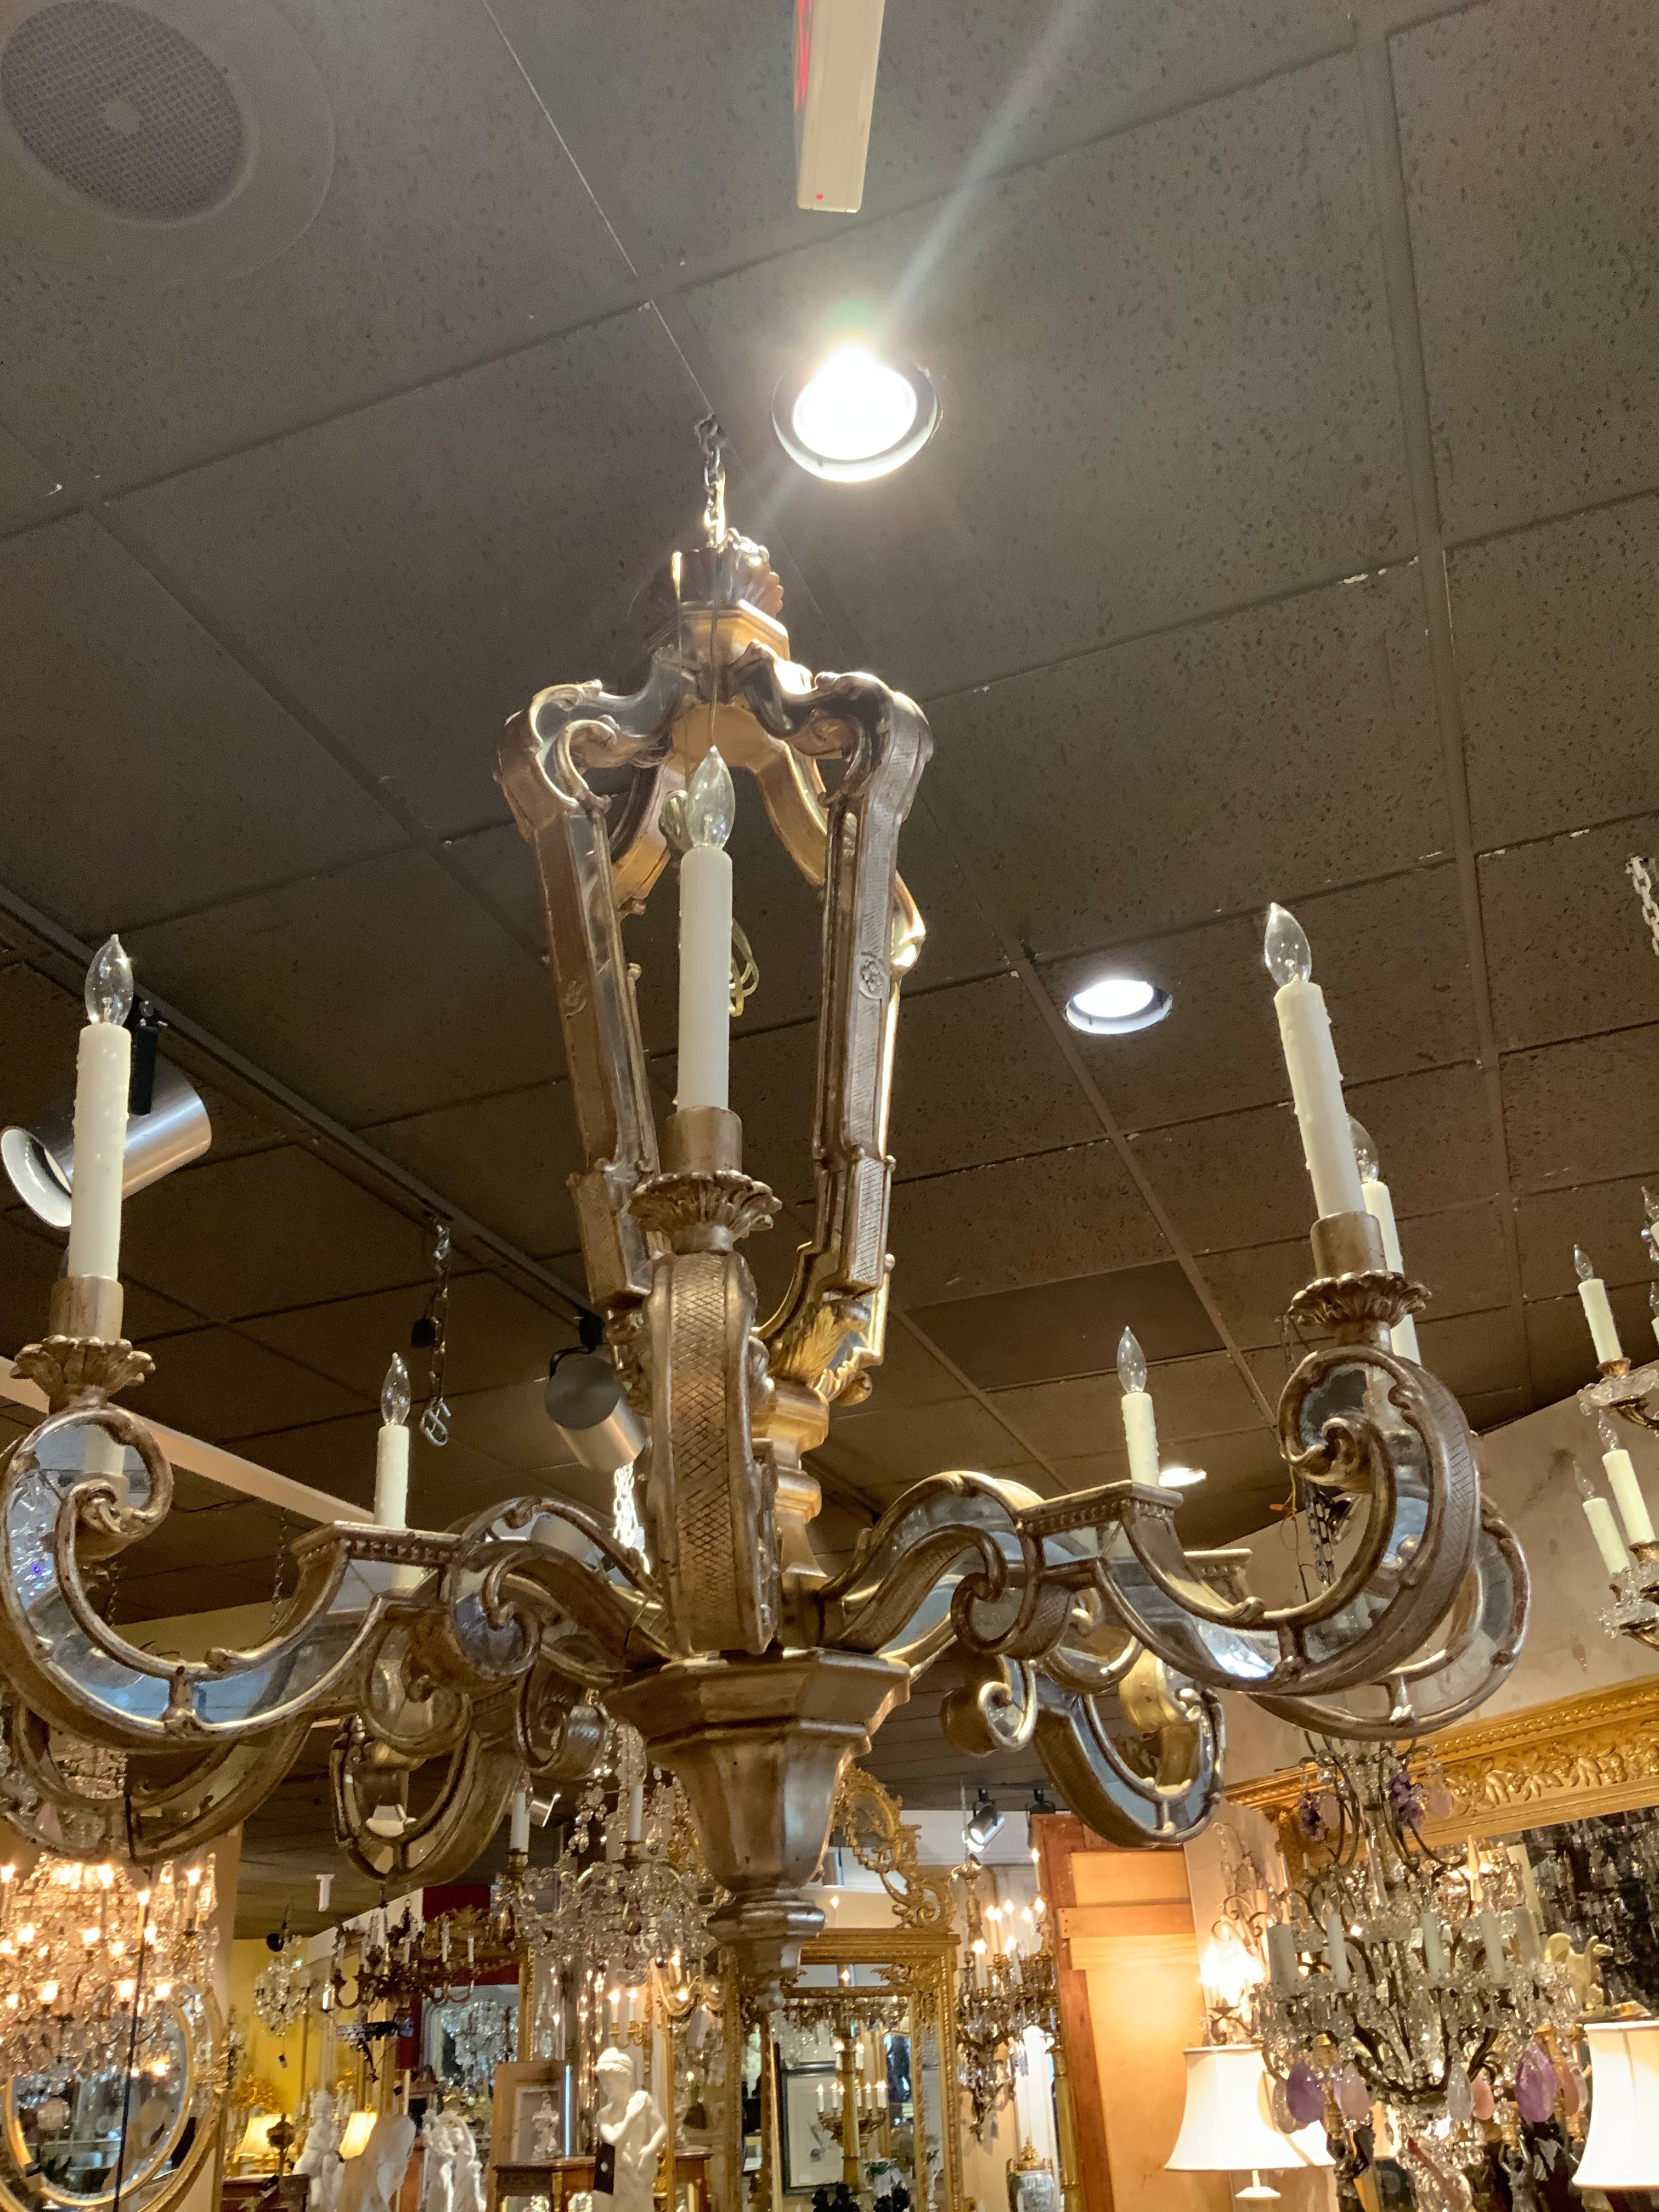 Decorative silver leaf wood carved mirror having eight scrolling arms and lights. Mirrors are
Inlaid into the body and the arms of this attractive chandelier.